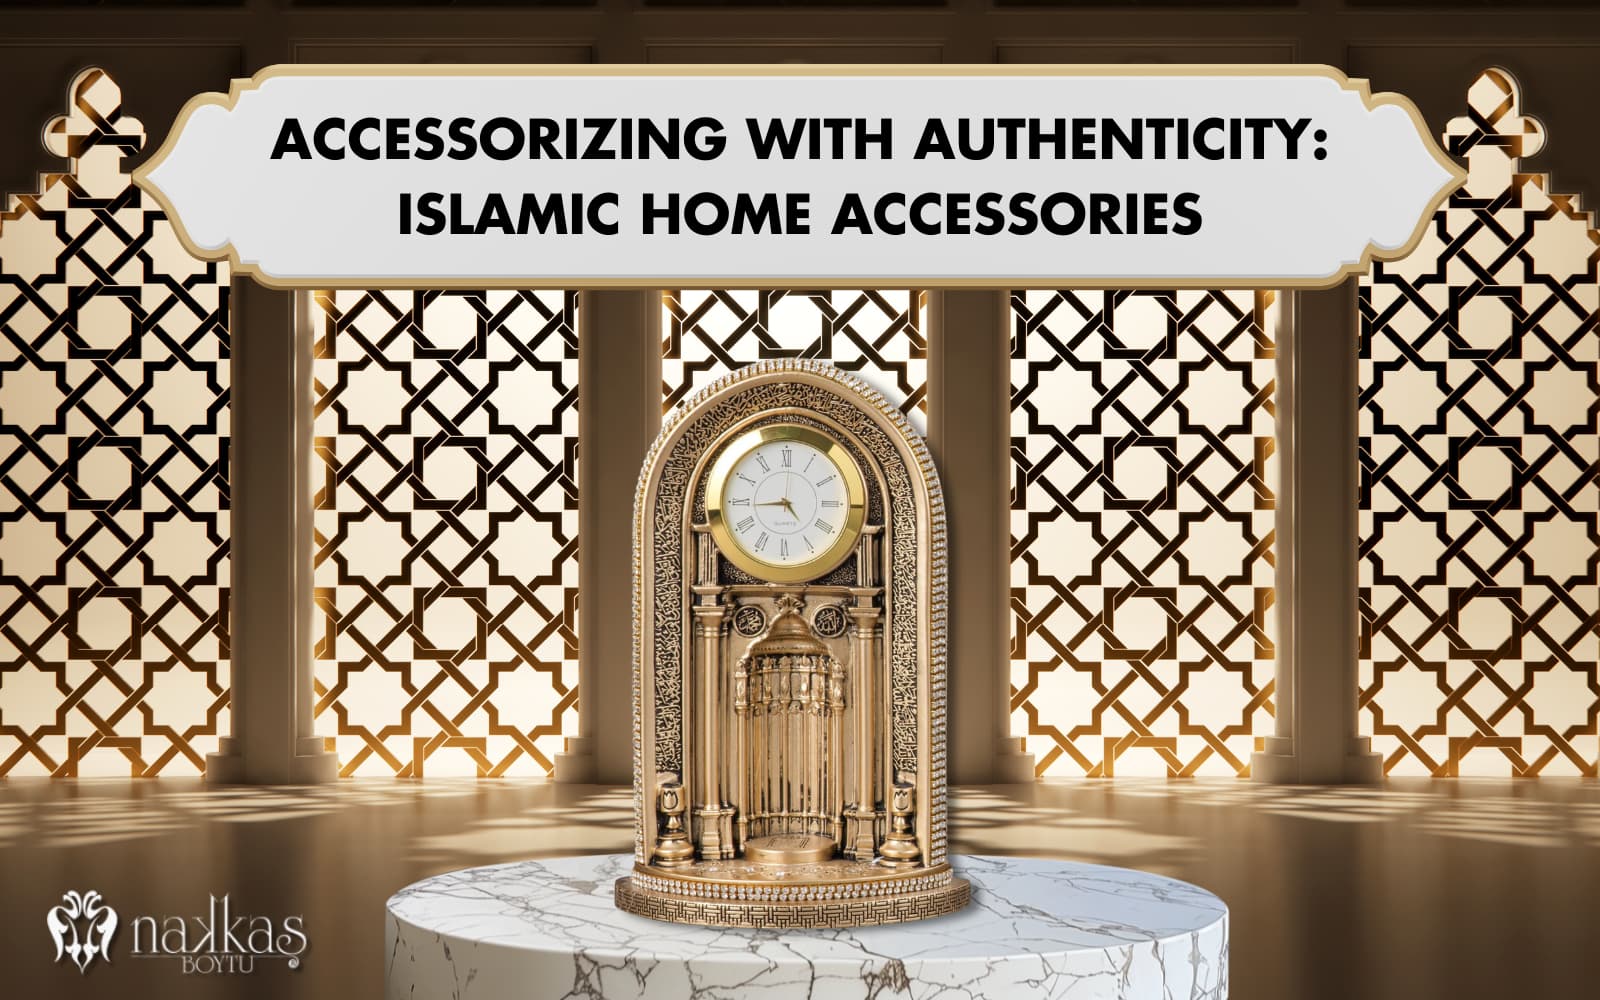 Accessorizing with Authenticity: Islamic Home Accessories